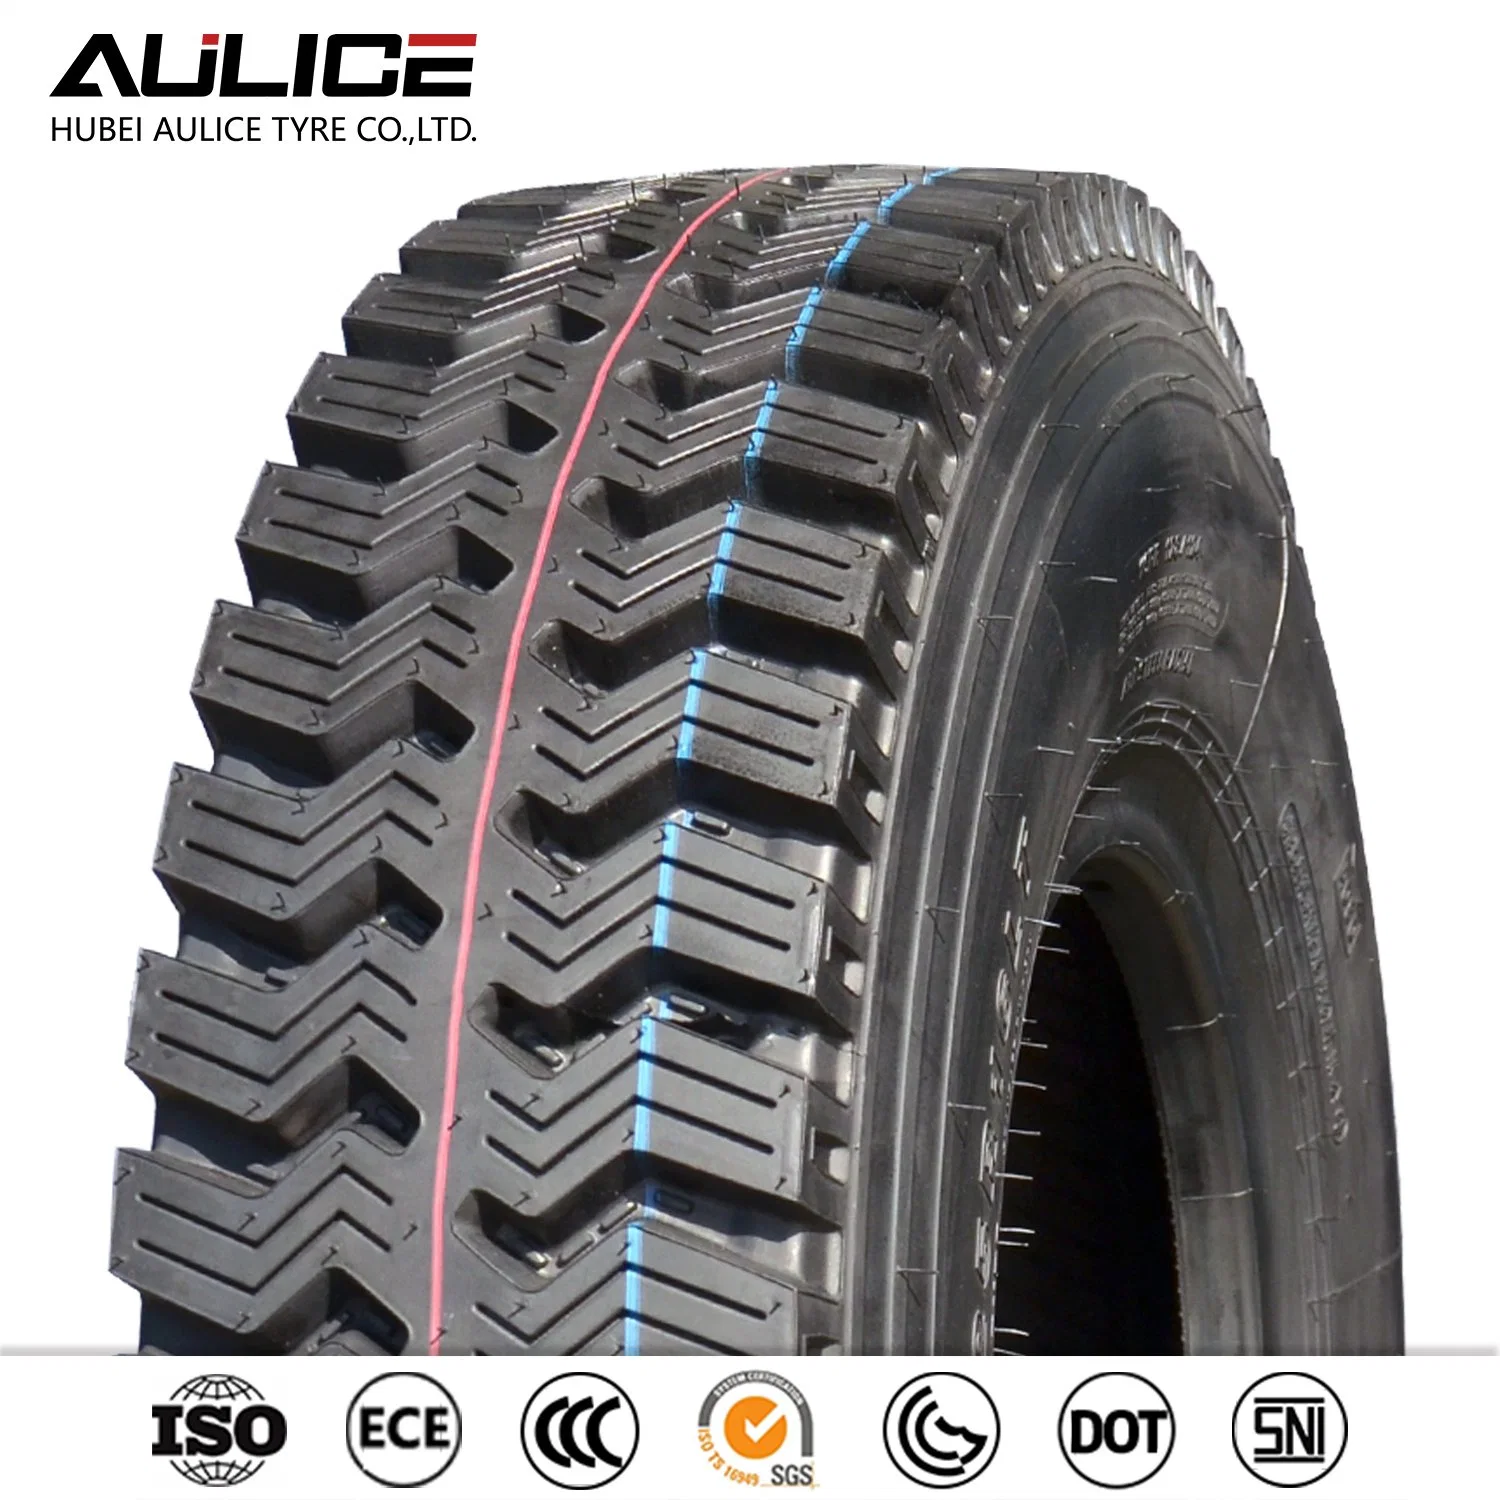 8.25R16/6.50R16/7.00R16/7.50R16/8.25R16 AULICE All steel radial solid truck bus TBR tire tyres with high quality and superb heat dissipation